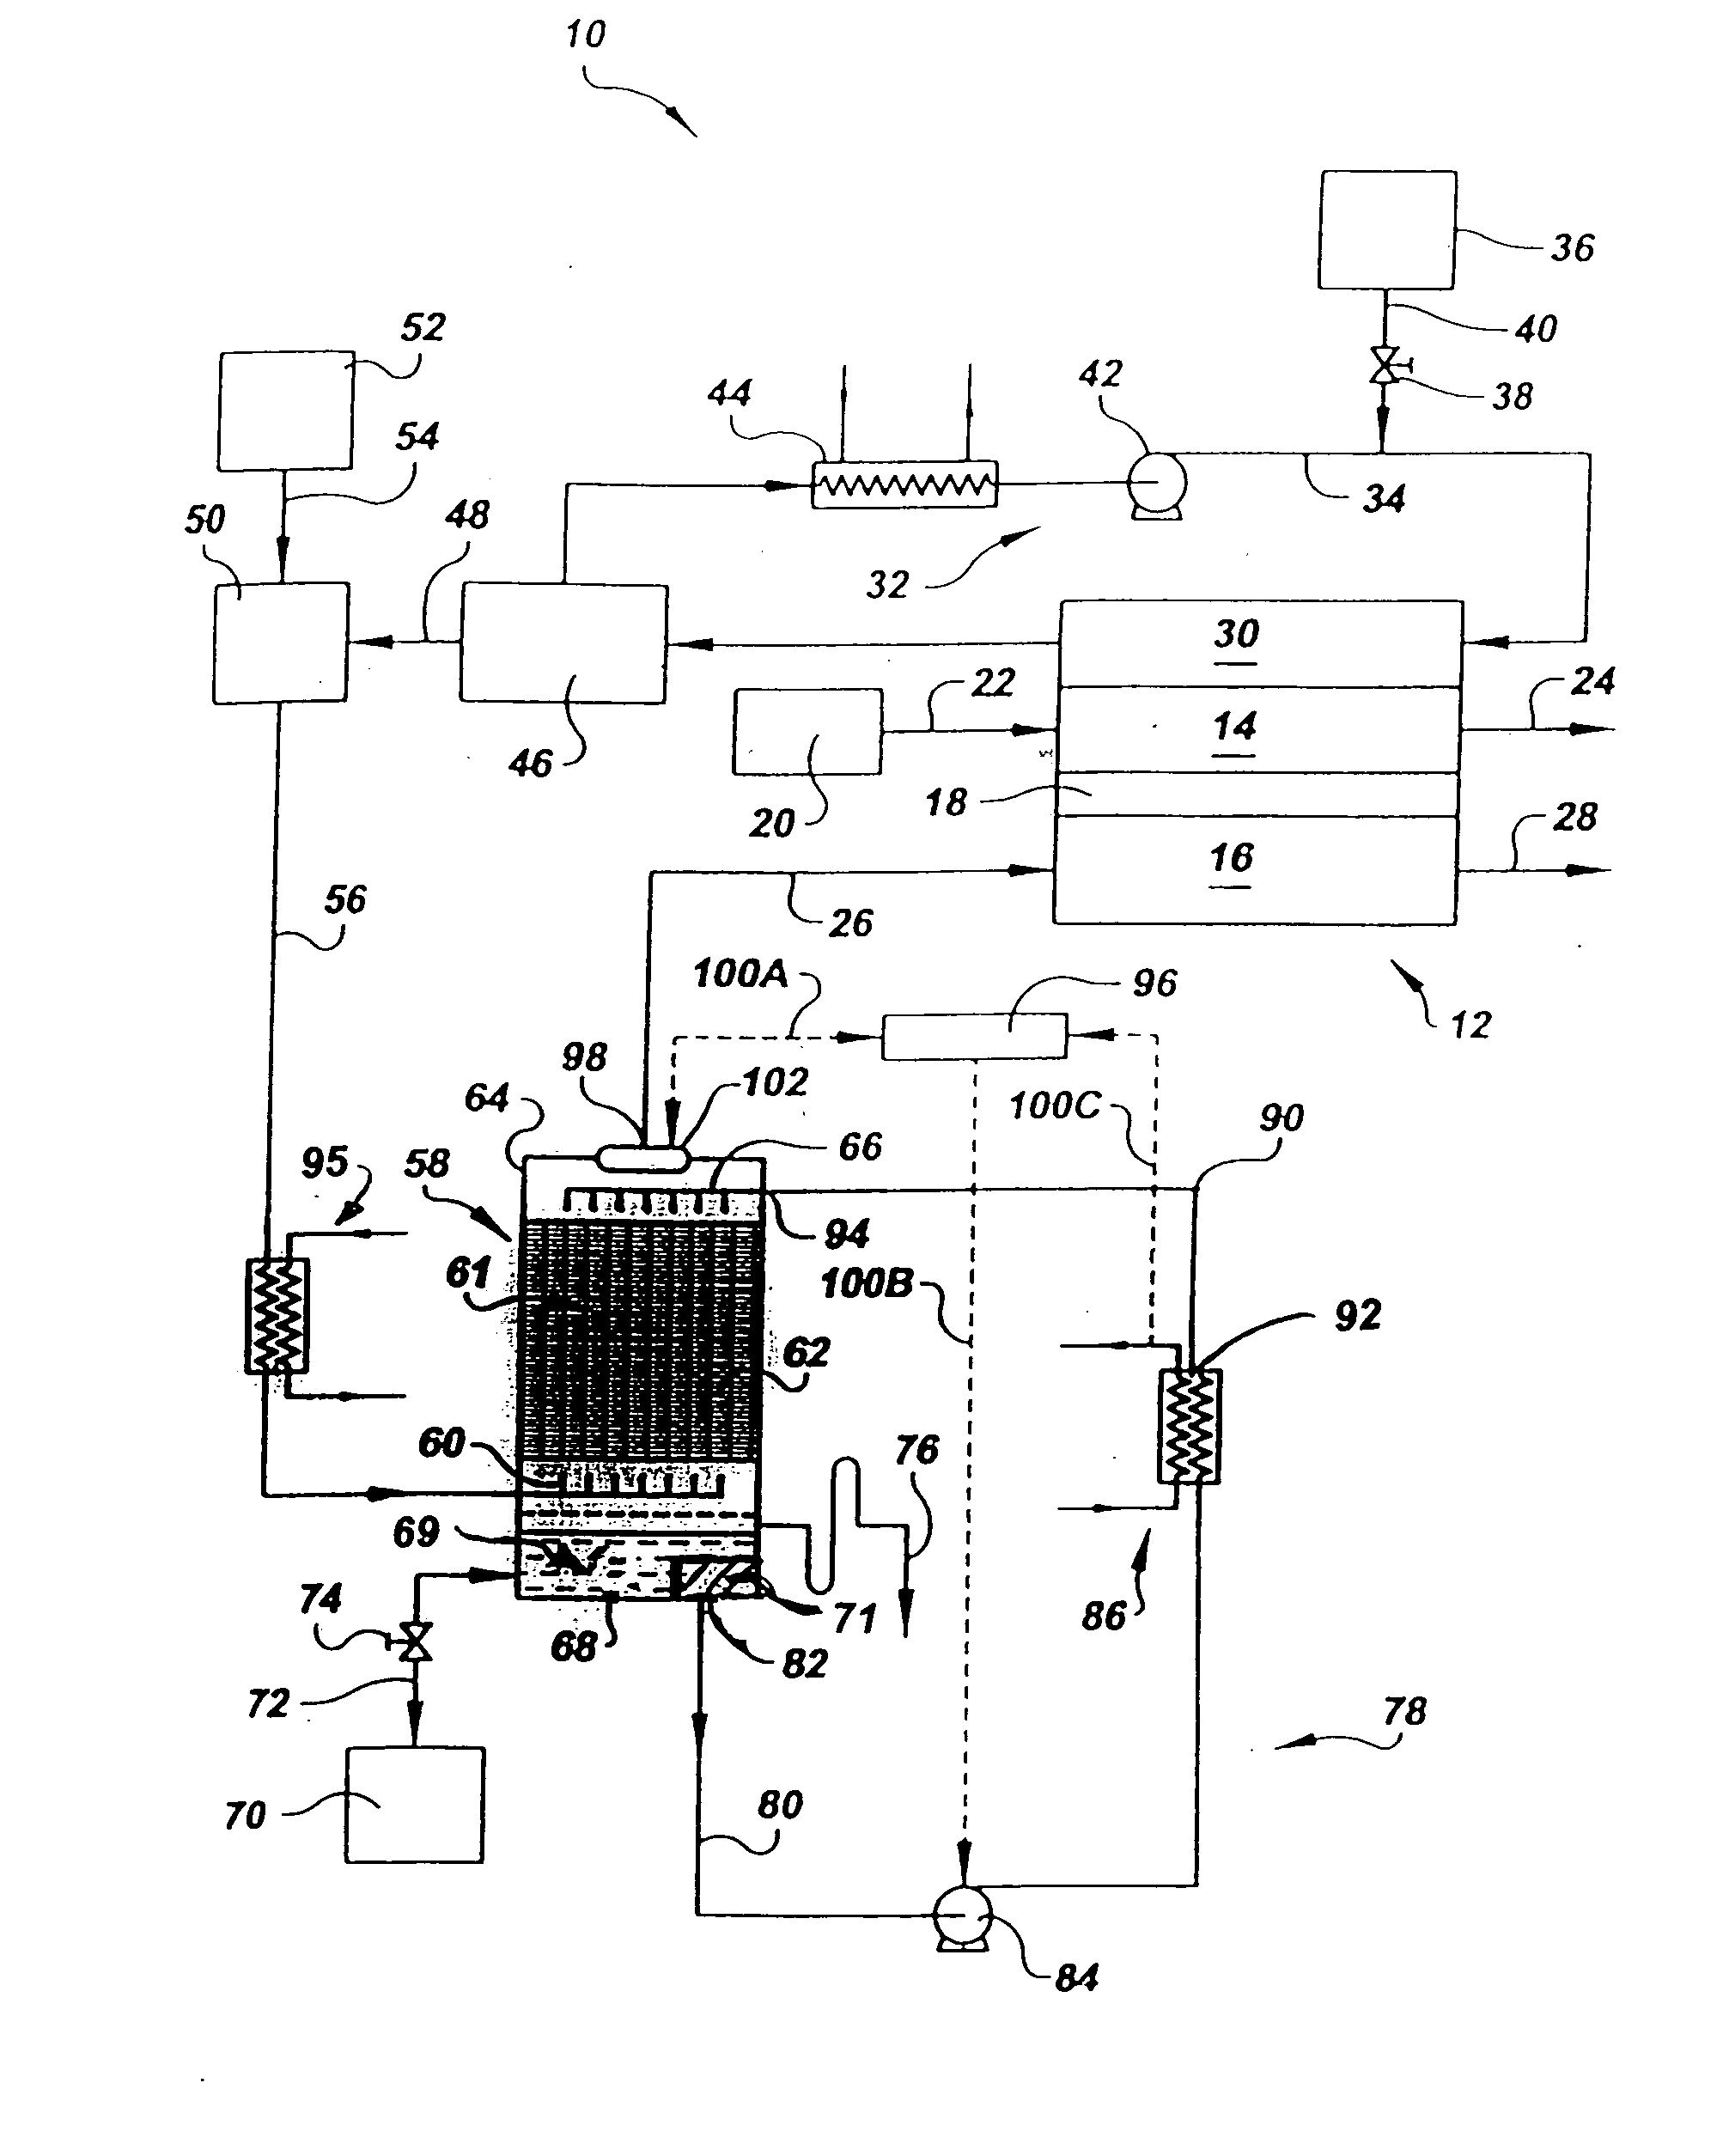 Integrated contaminant6 separator and water-control loop for a fuel reactant stream